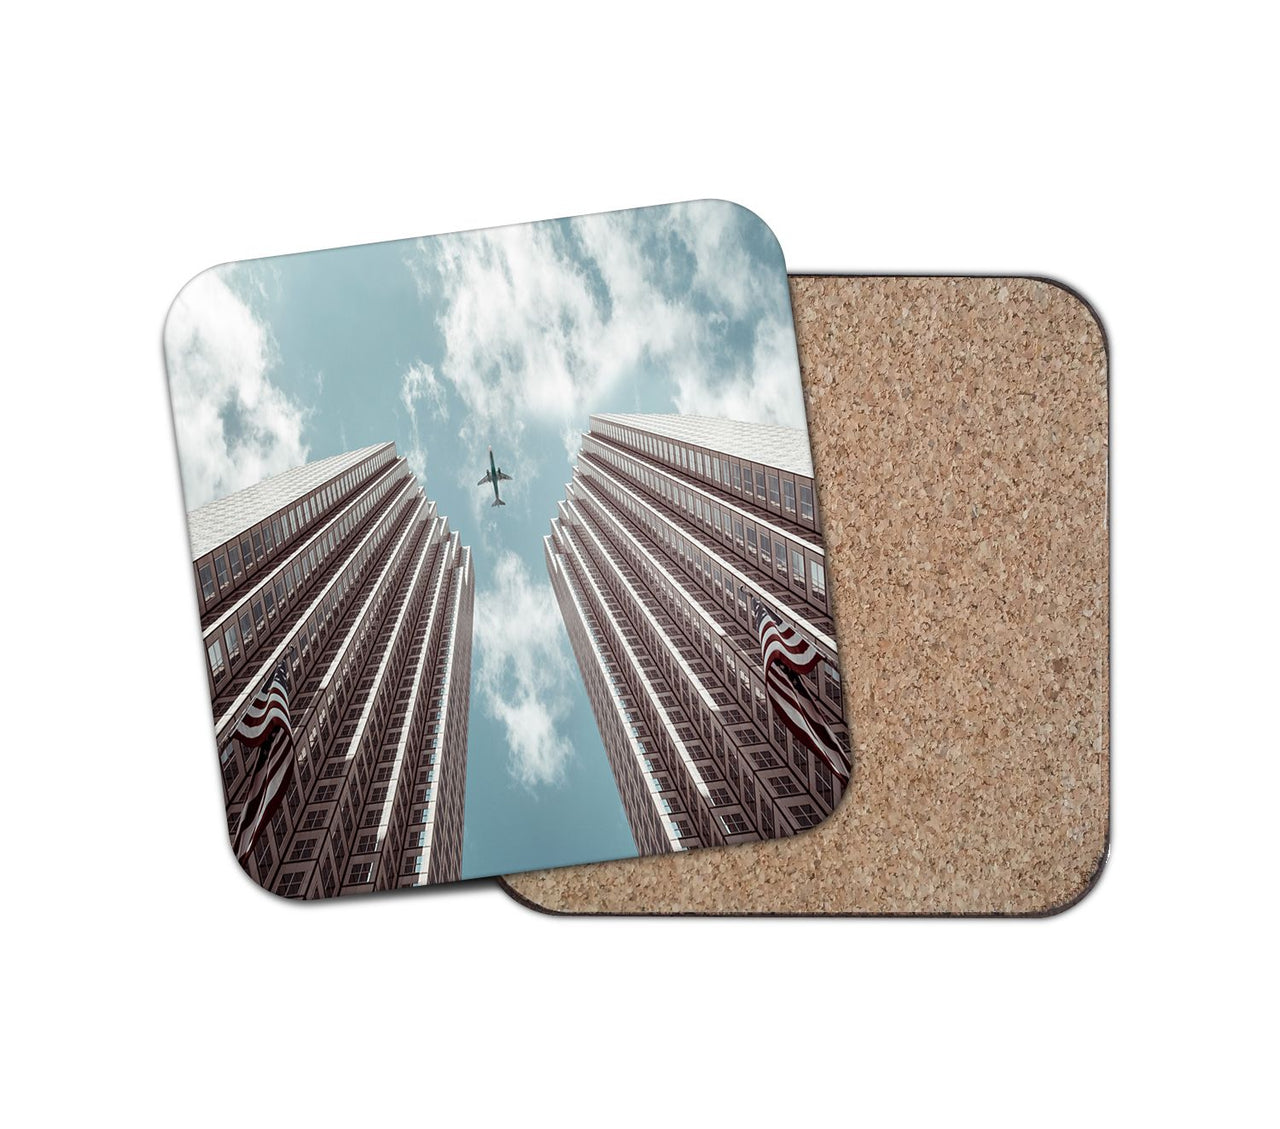 Airplane Flying over Big Buildings Designed Coasters